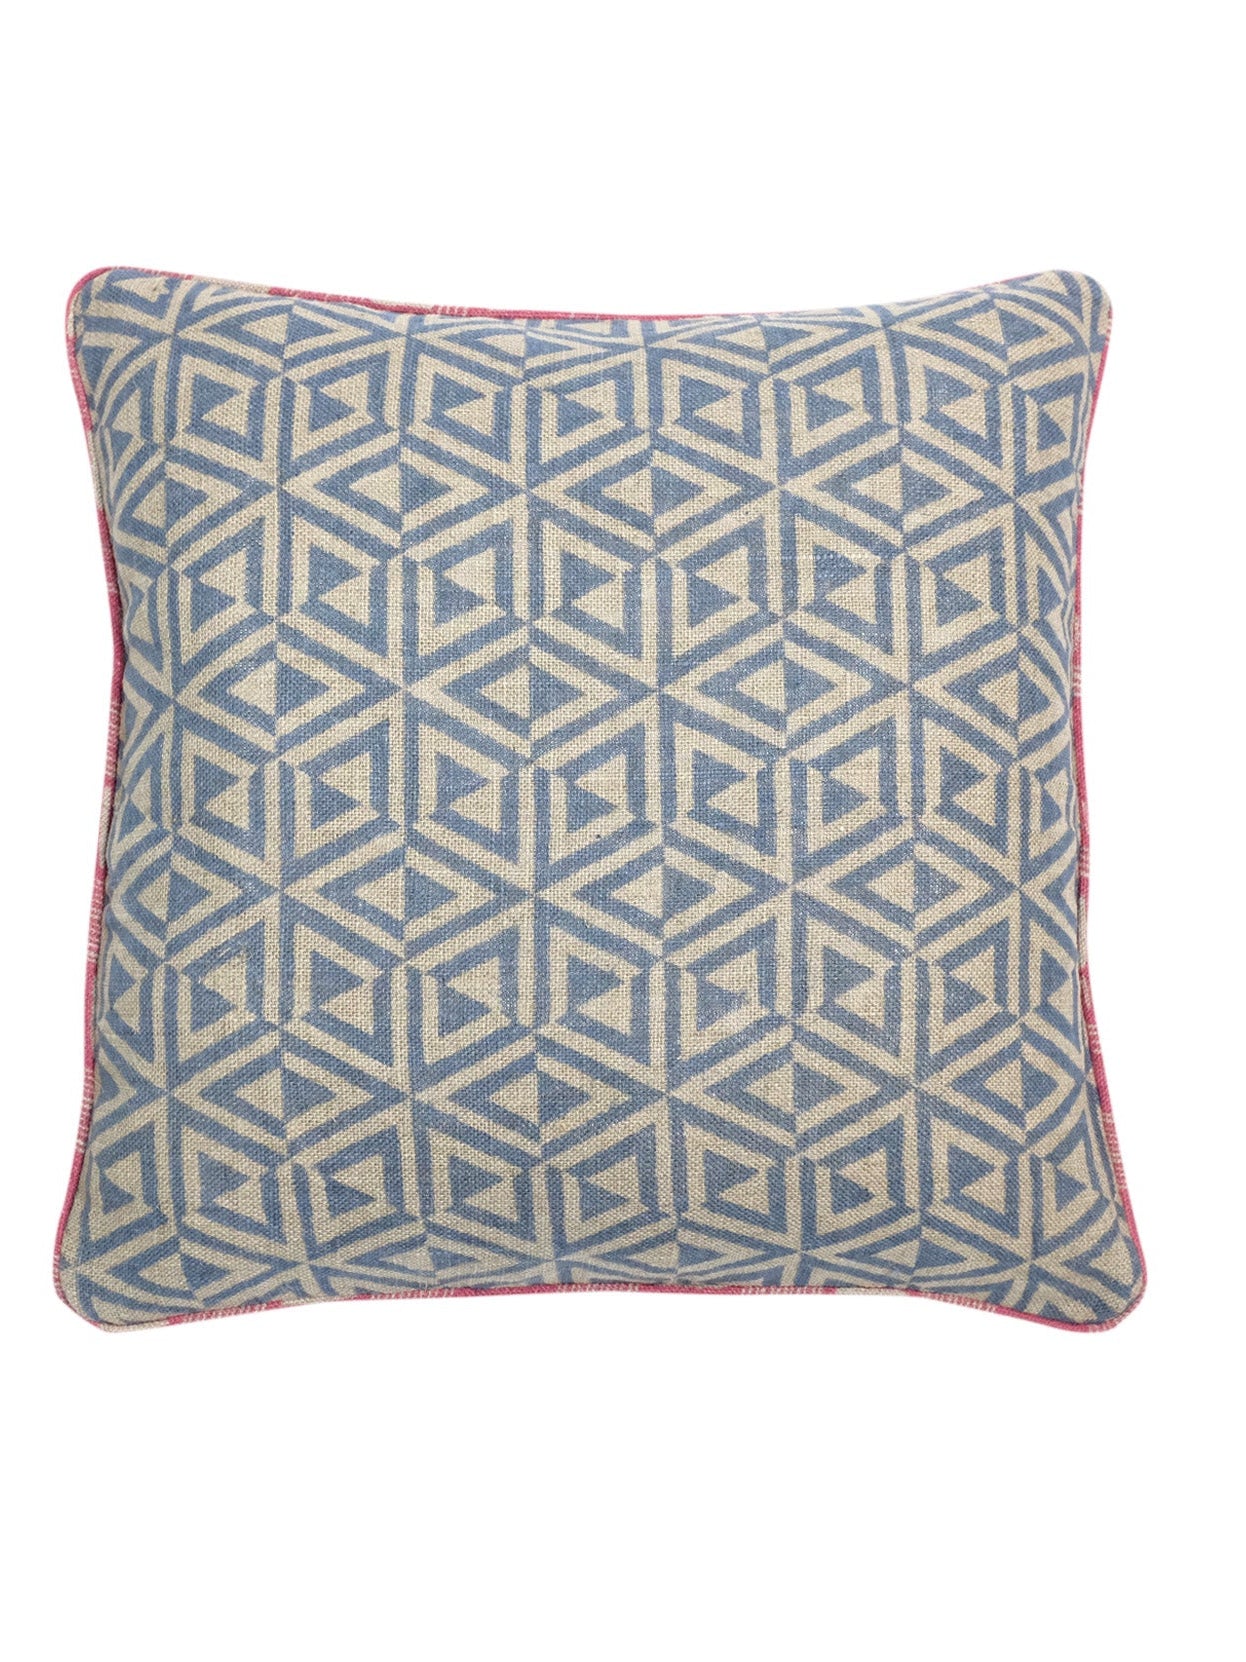 Small piped grey honeycomb linen cushion 45 x 45cm-Humphries and Begg